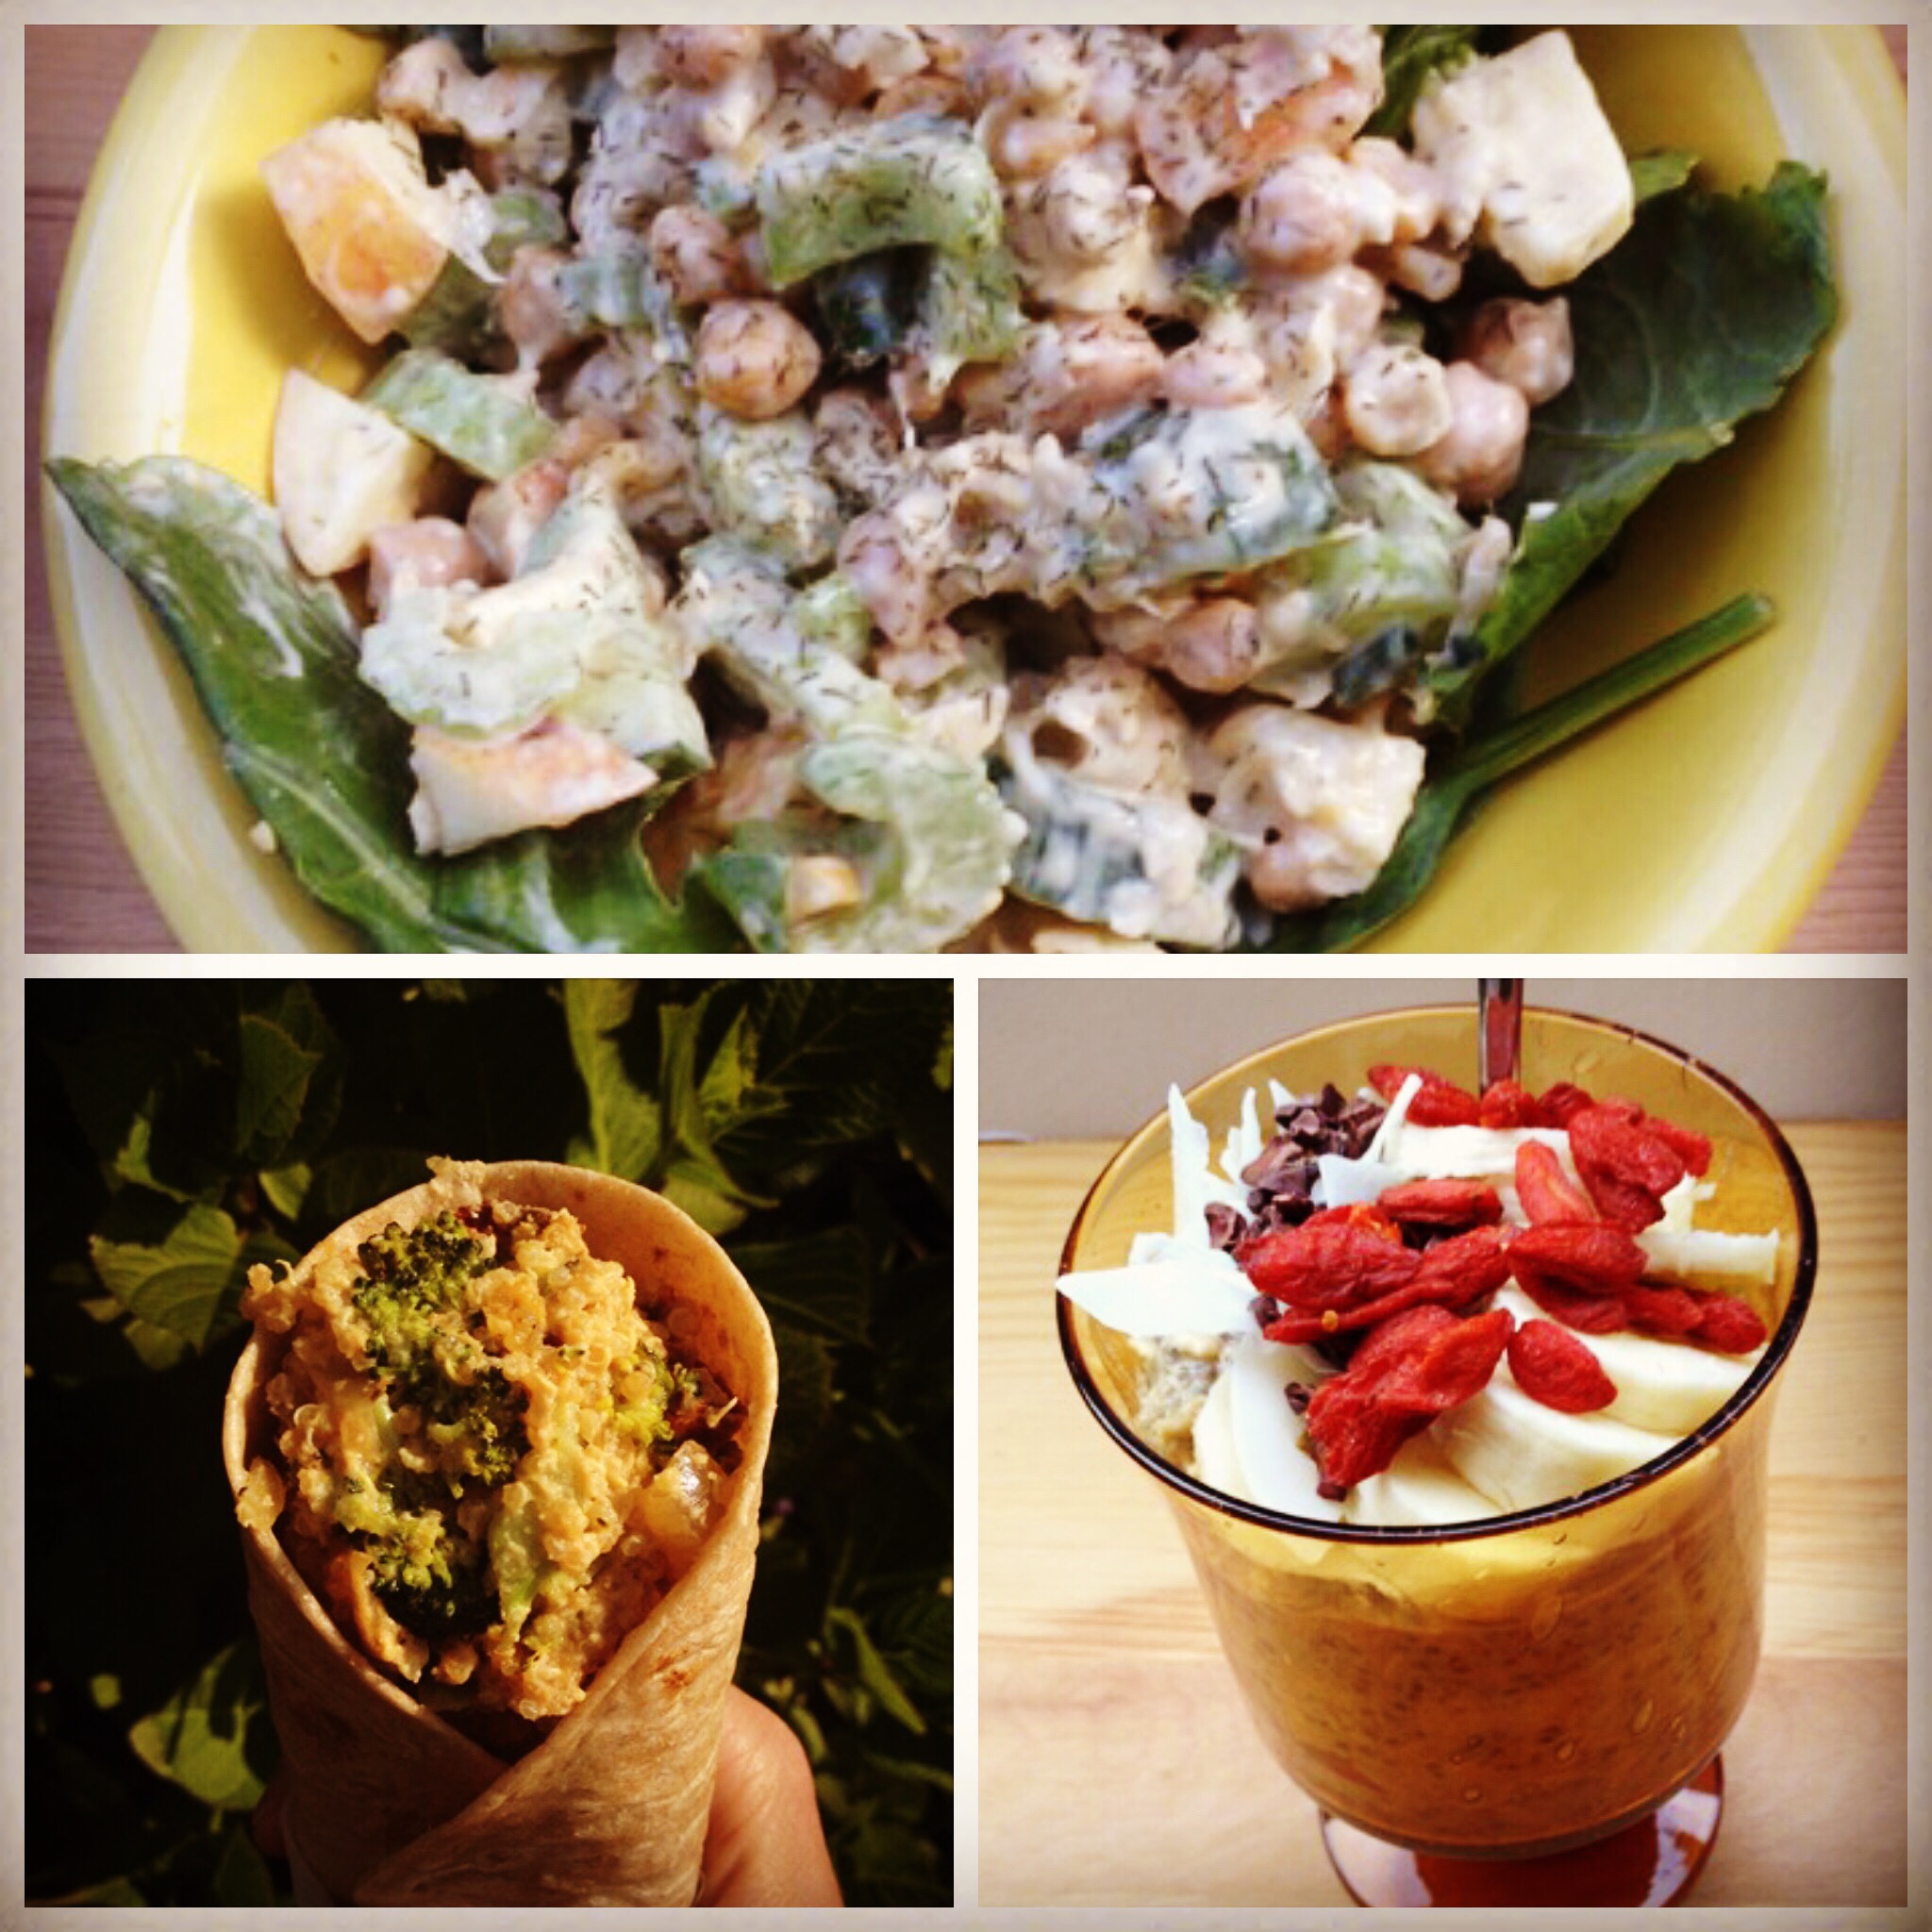 Review of the Chickpea Salad, Broccoli and Cashew Cheese Quinoa Burrito, and the Overnight Oats